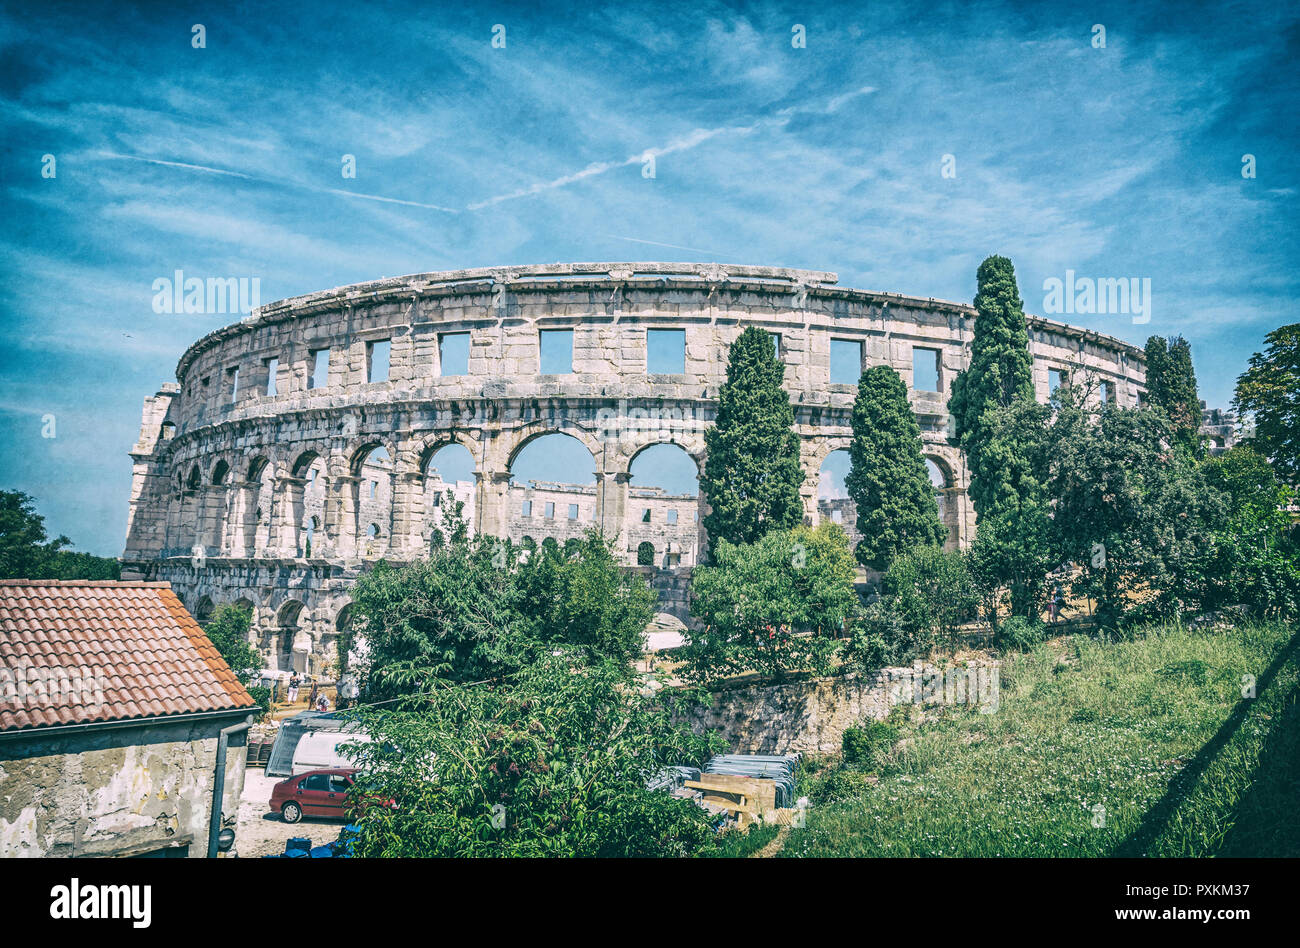 Ancient amphitheater located in Pula, Istria, Croatia. Travel destination. Famous object. Analog photo filter with scratches. Stock Photo